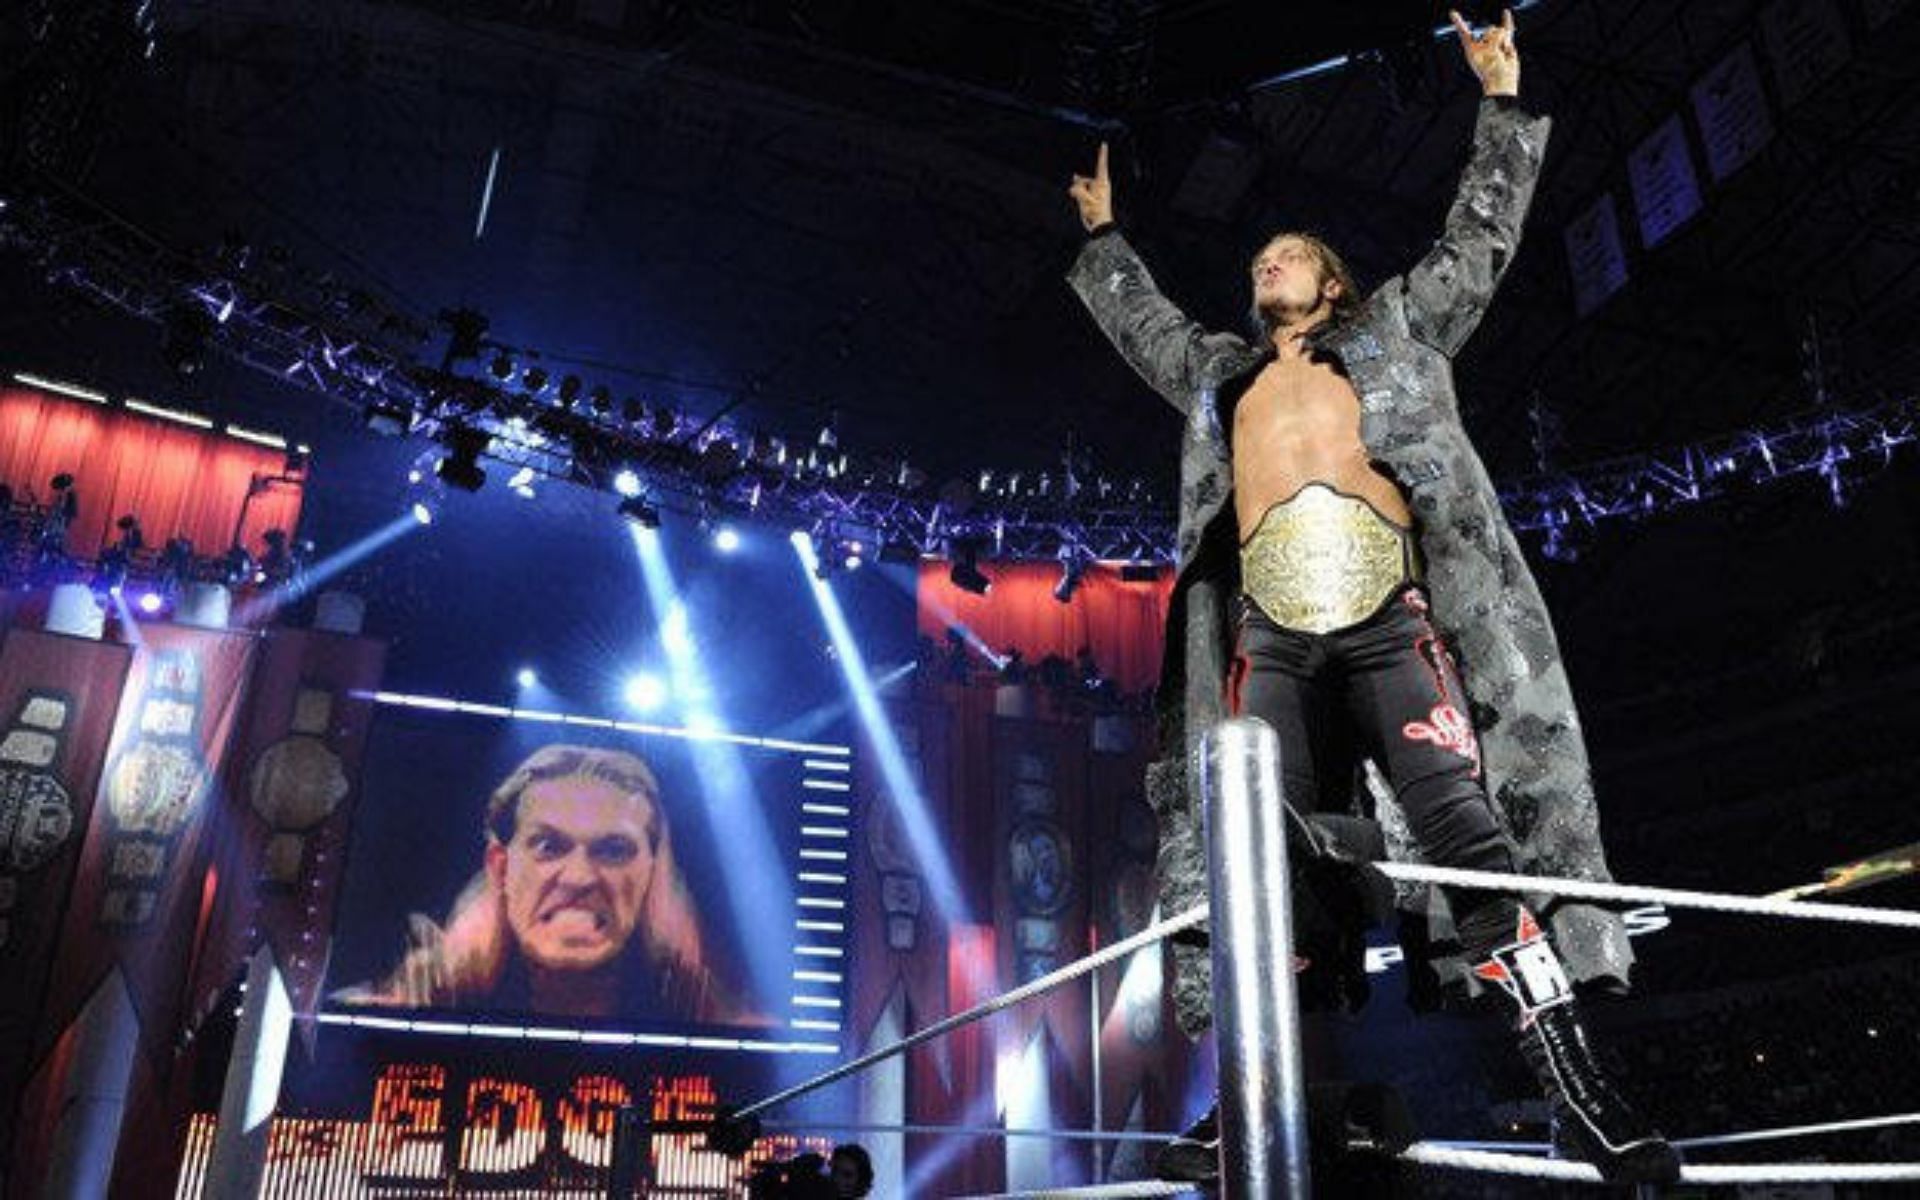 Edge is a multi-time world champion